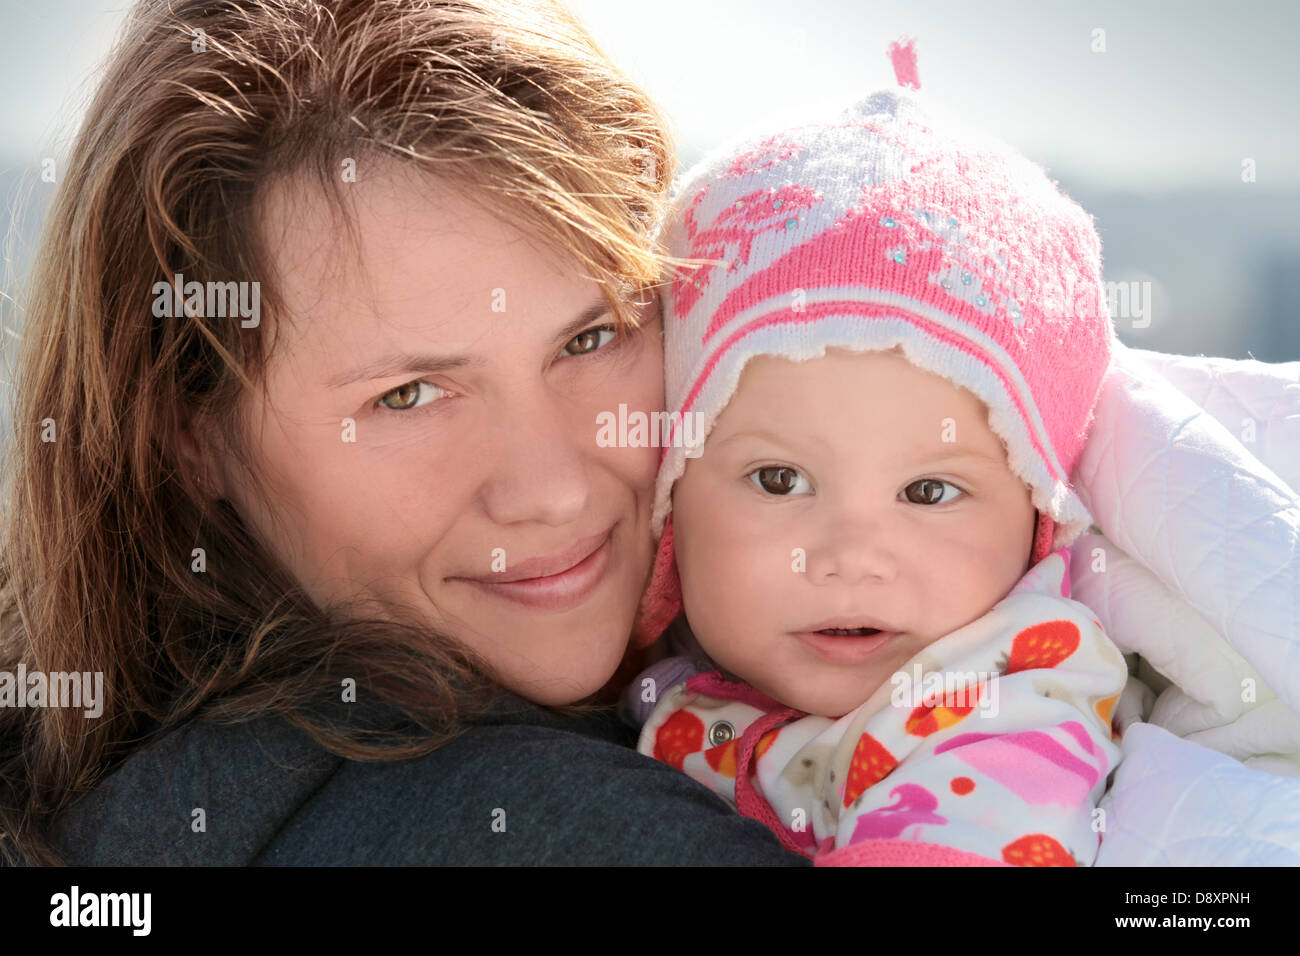 Young woman holds her sleepy baby girl in blanket. Outdoor closeup portrait Stock Photo